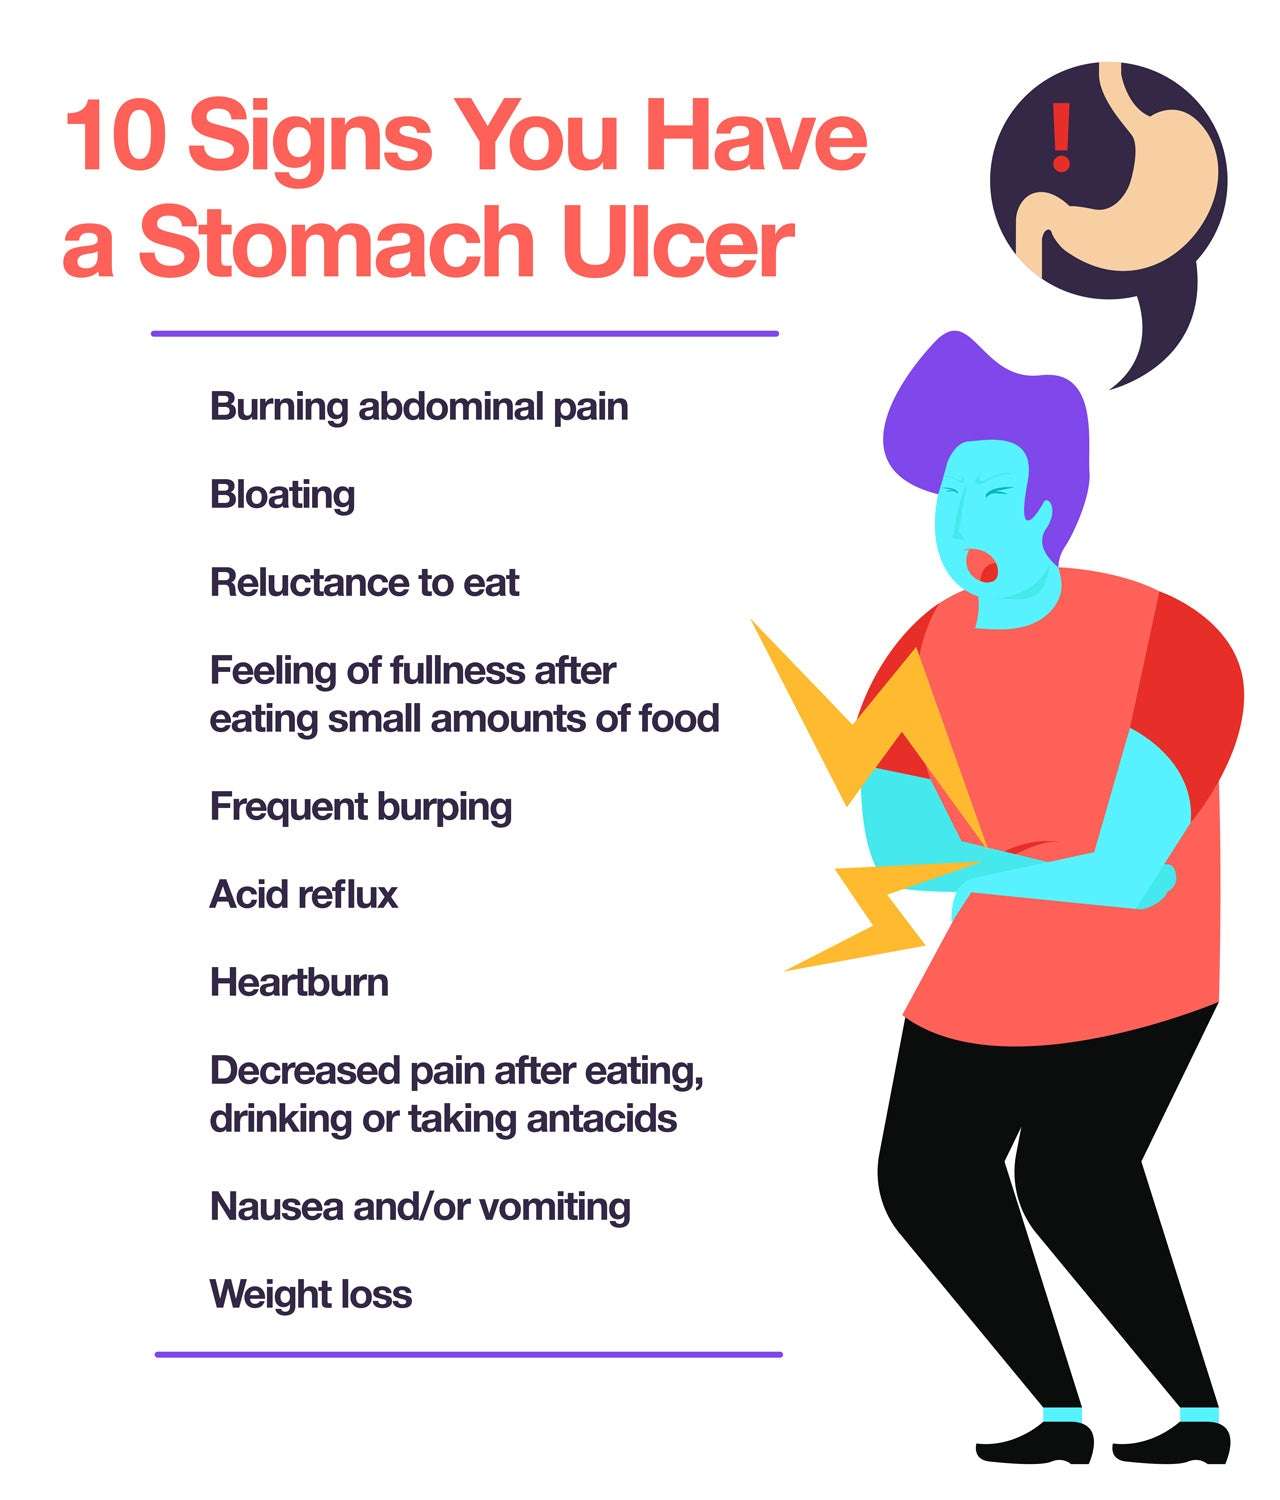 What Are The Symptoms Of Having A Stomach Ulcer